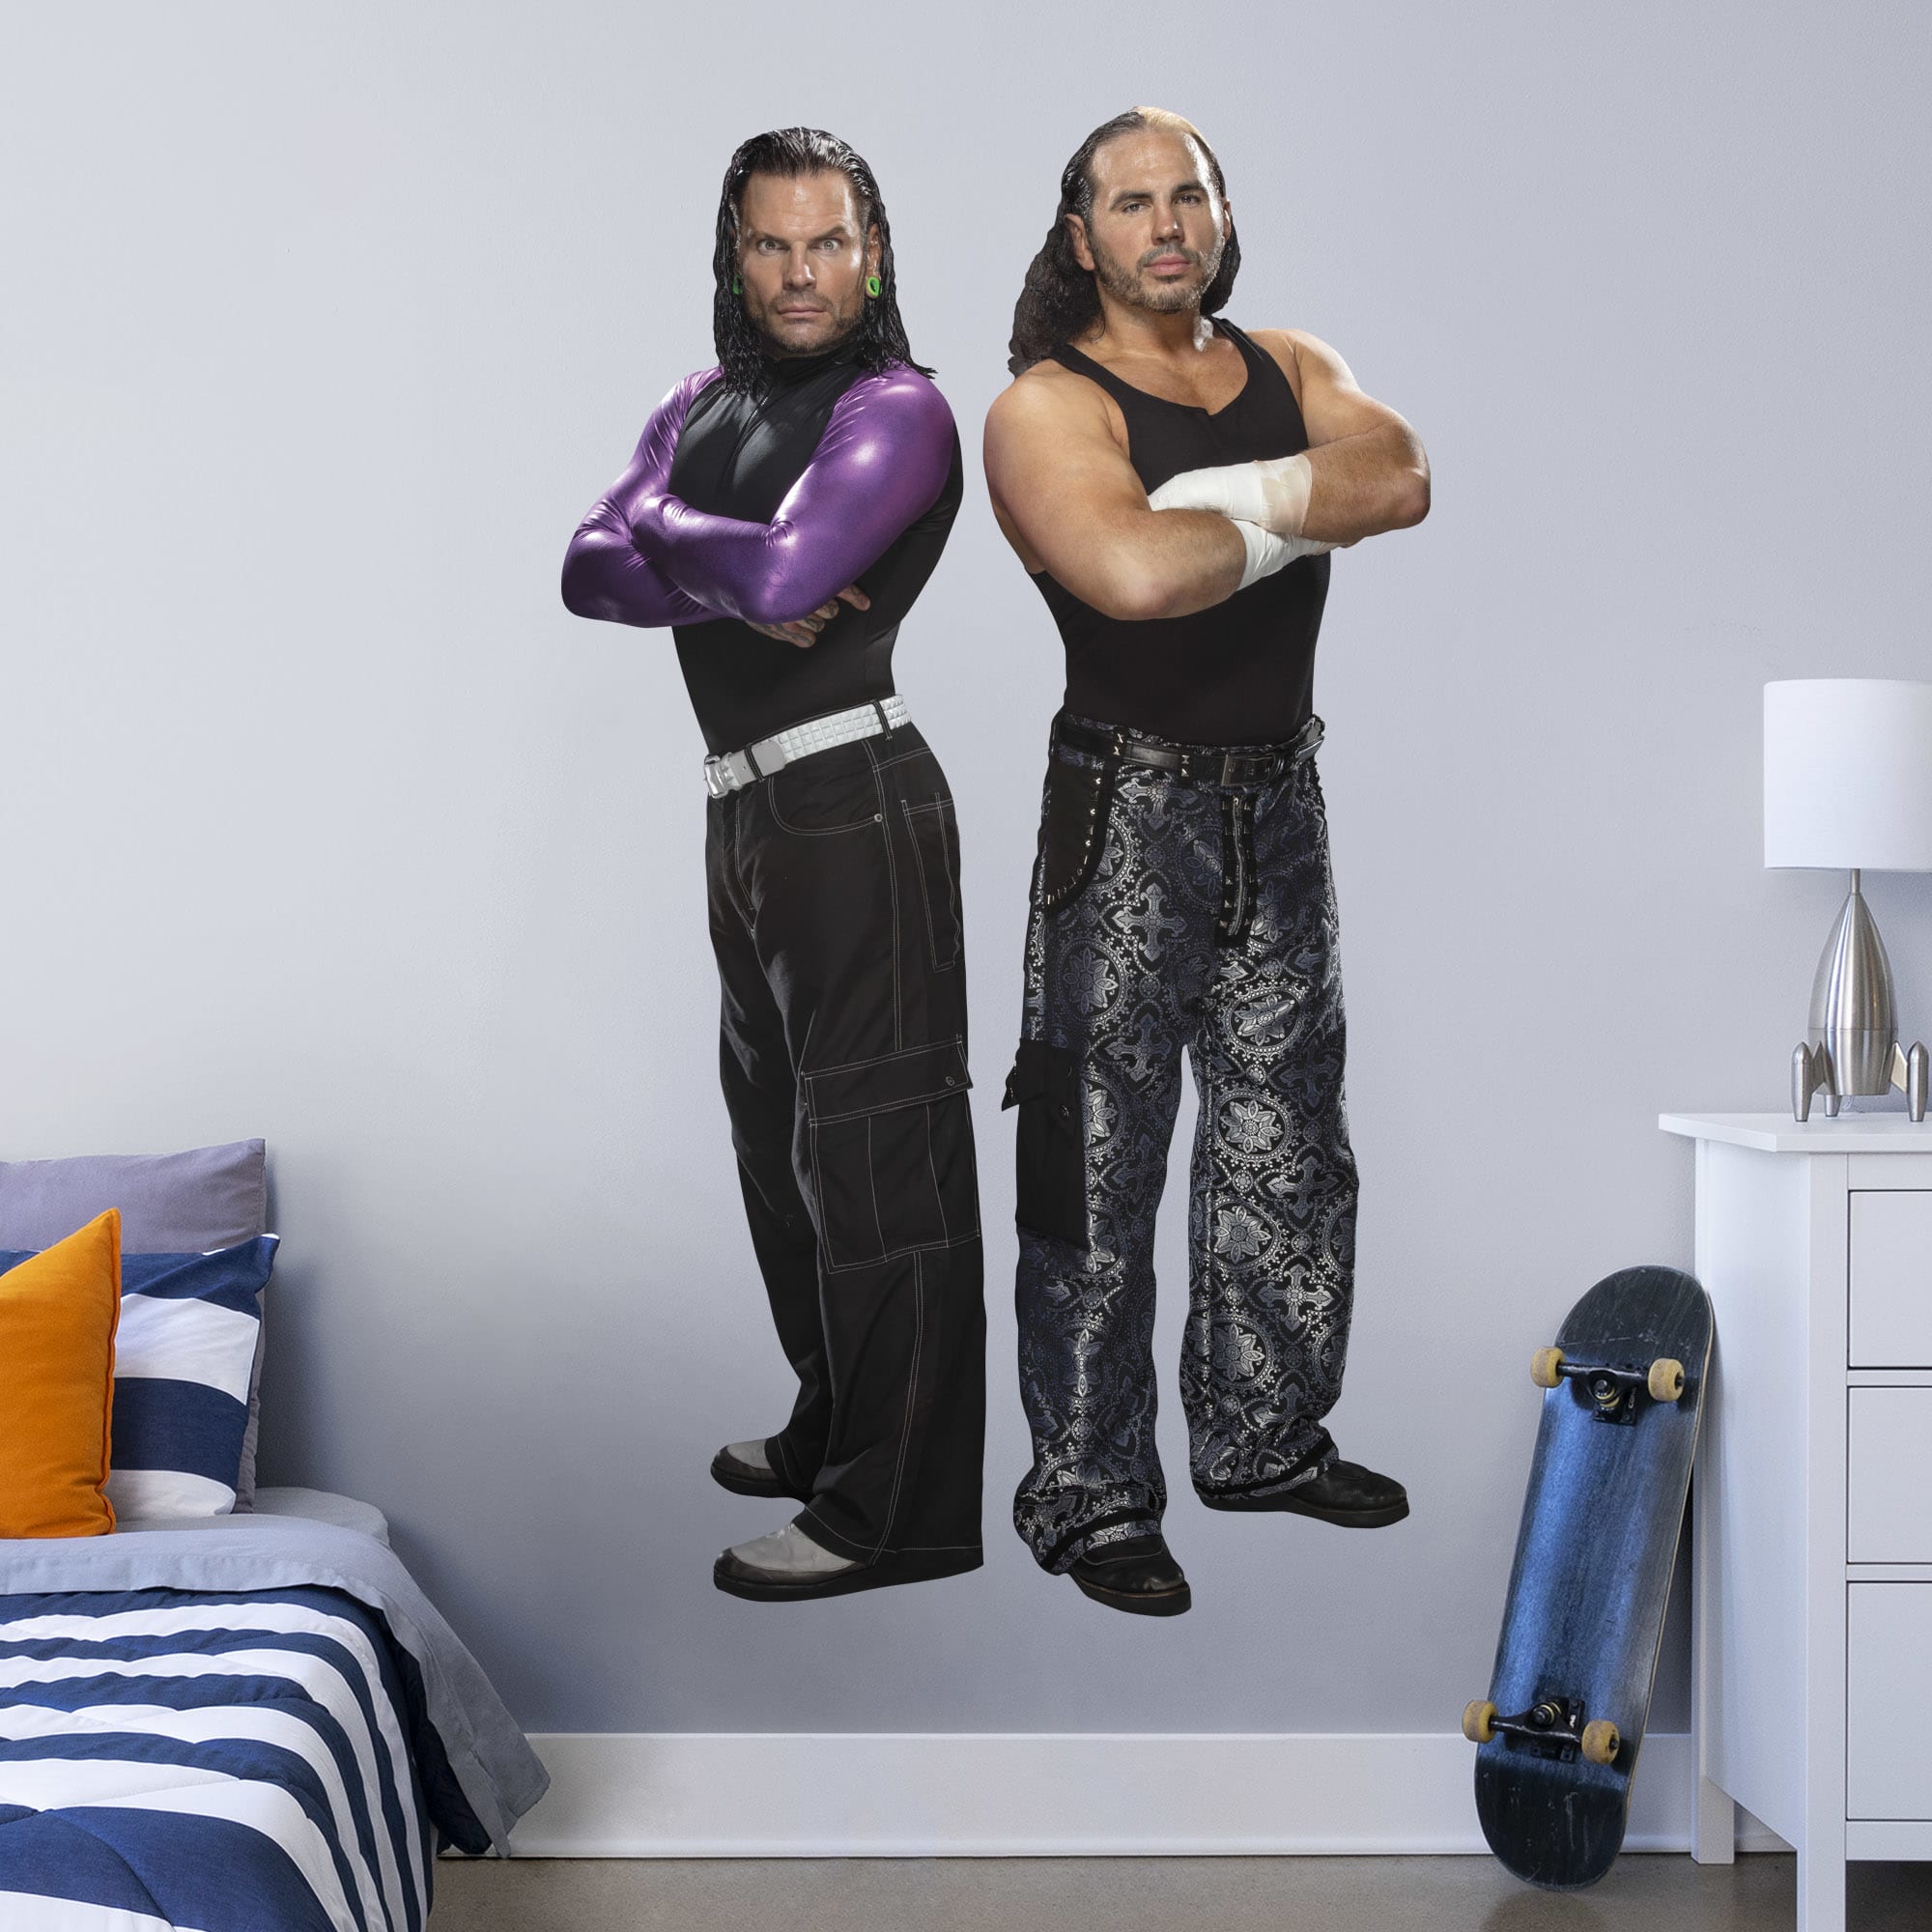 Hardy Boyz for WWE - Officially Licensed Removable Wall Decal Life-Size Superstar + 2 Decals (21"W x 75"H) by Fathead | Vinyl